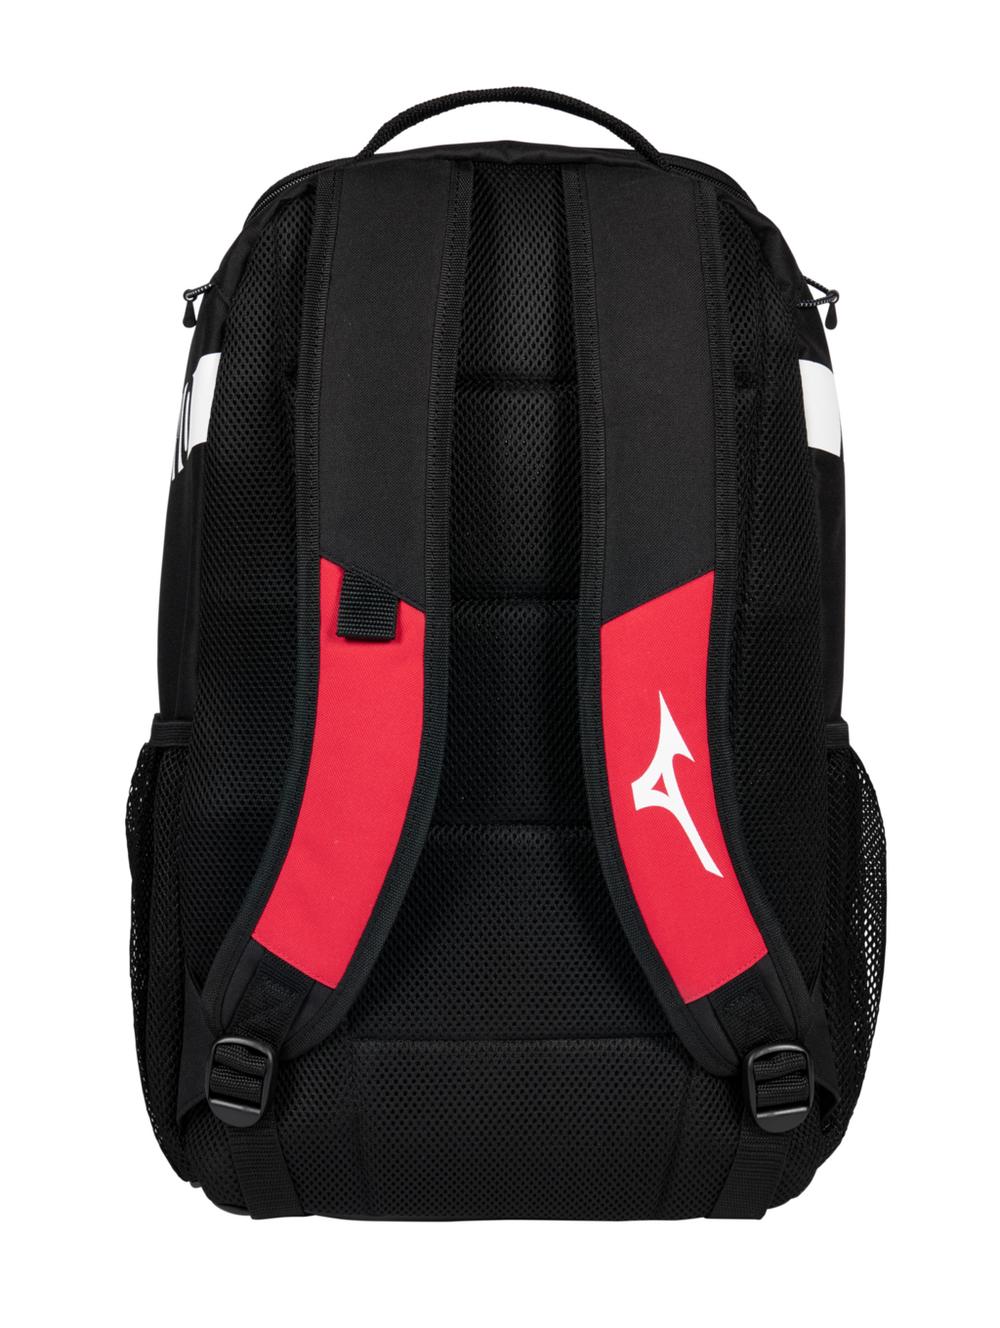 A photo of the Mizuno Crossover Backpack 22 in colour red back view.